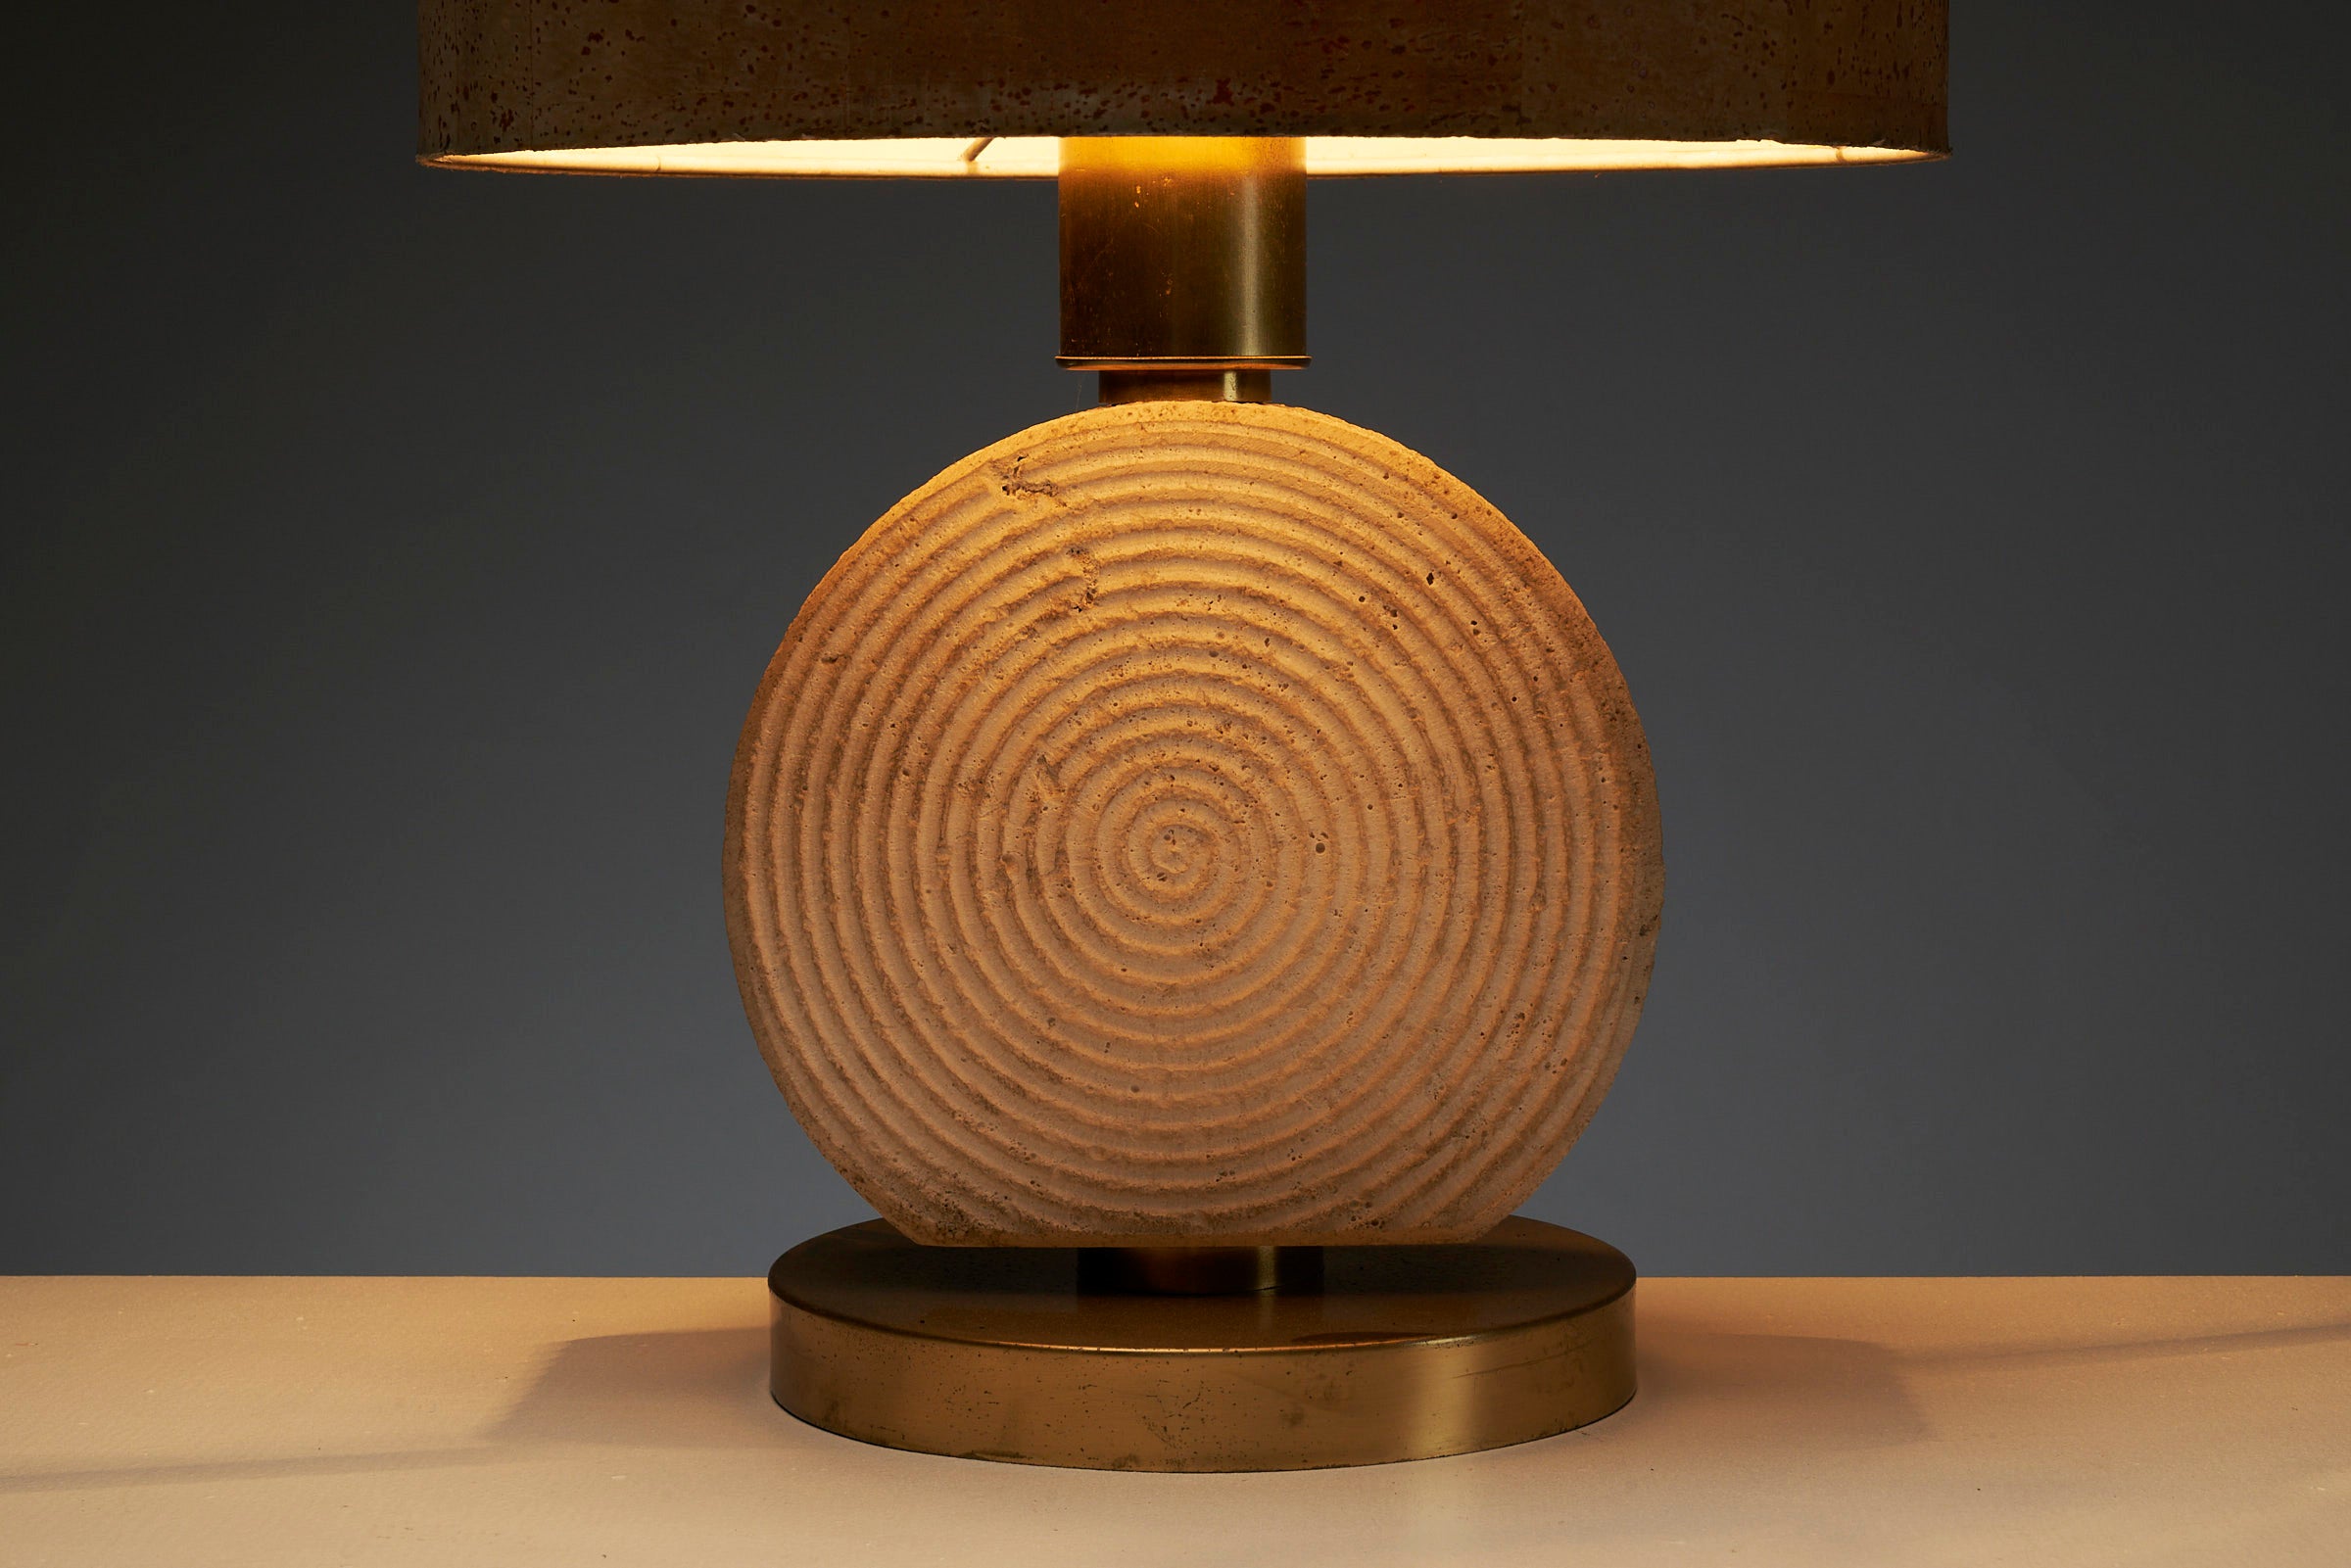 Naturel Table Lamp in Travertin with Cork Shade